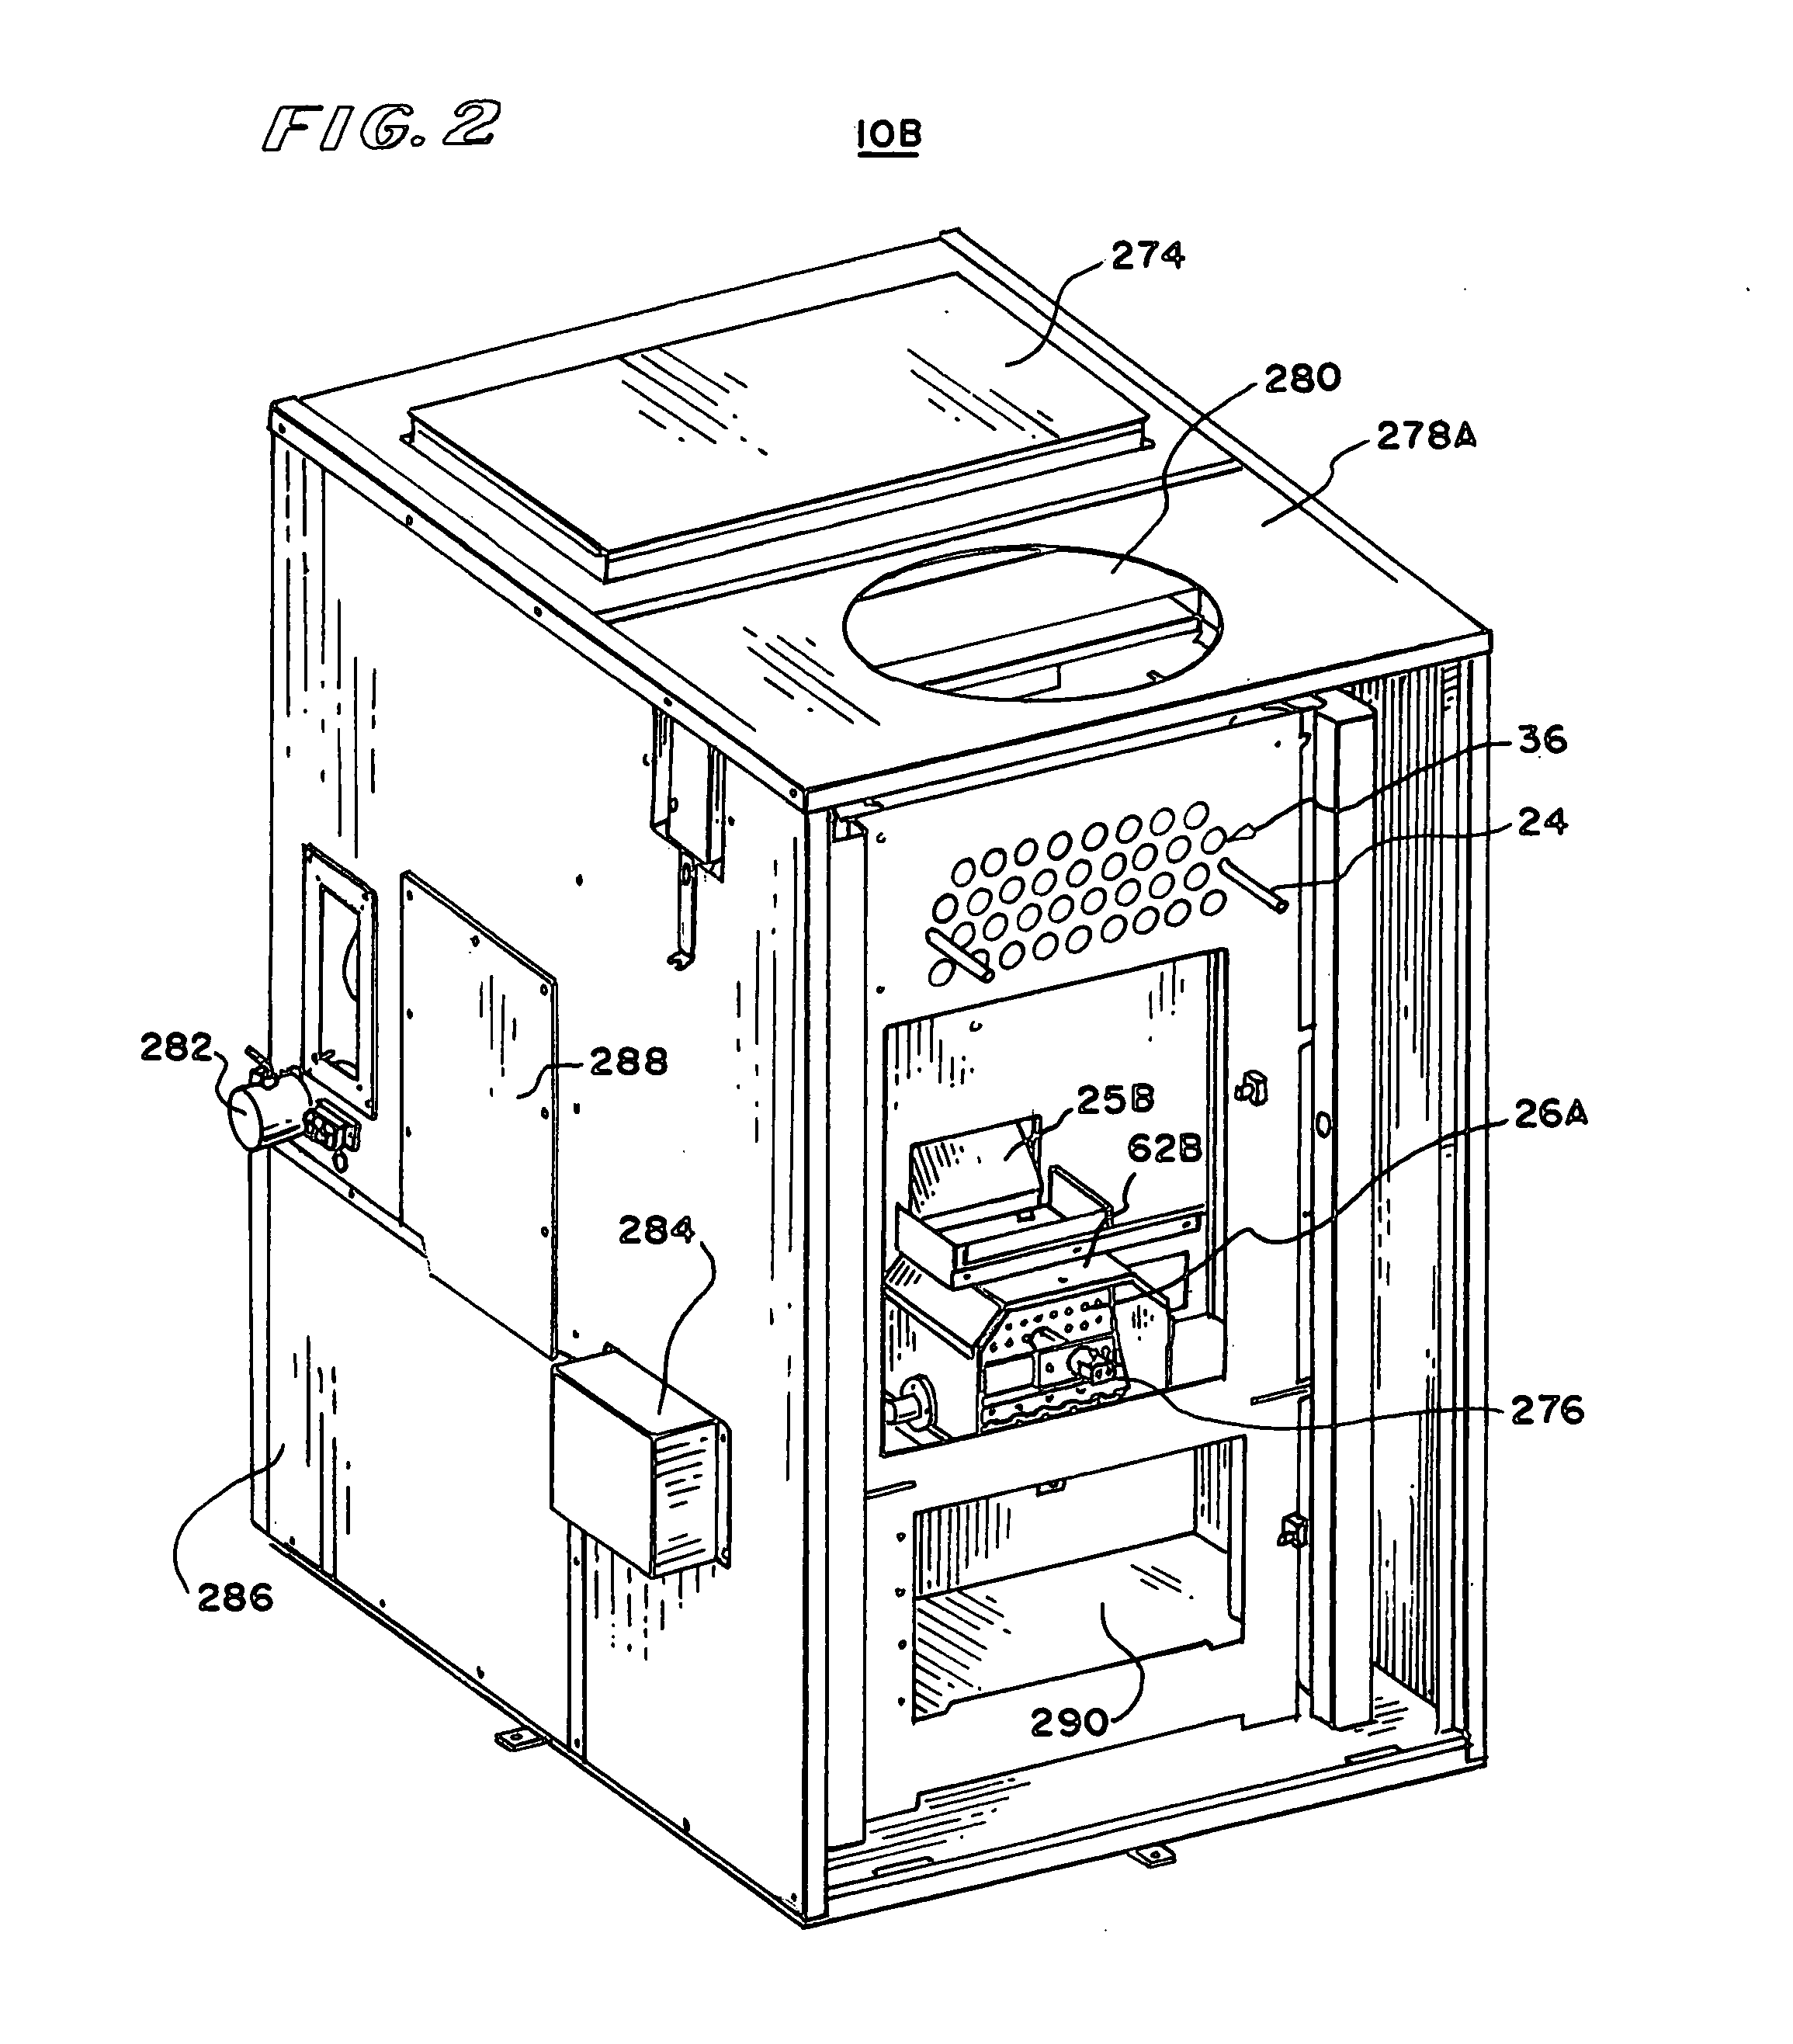 Apparatus and method for combustion